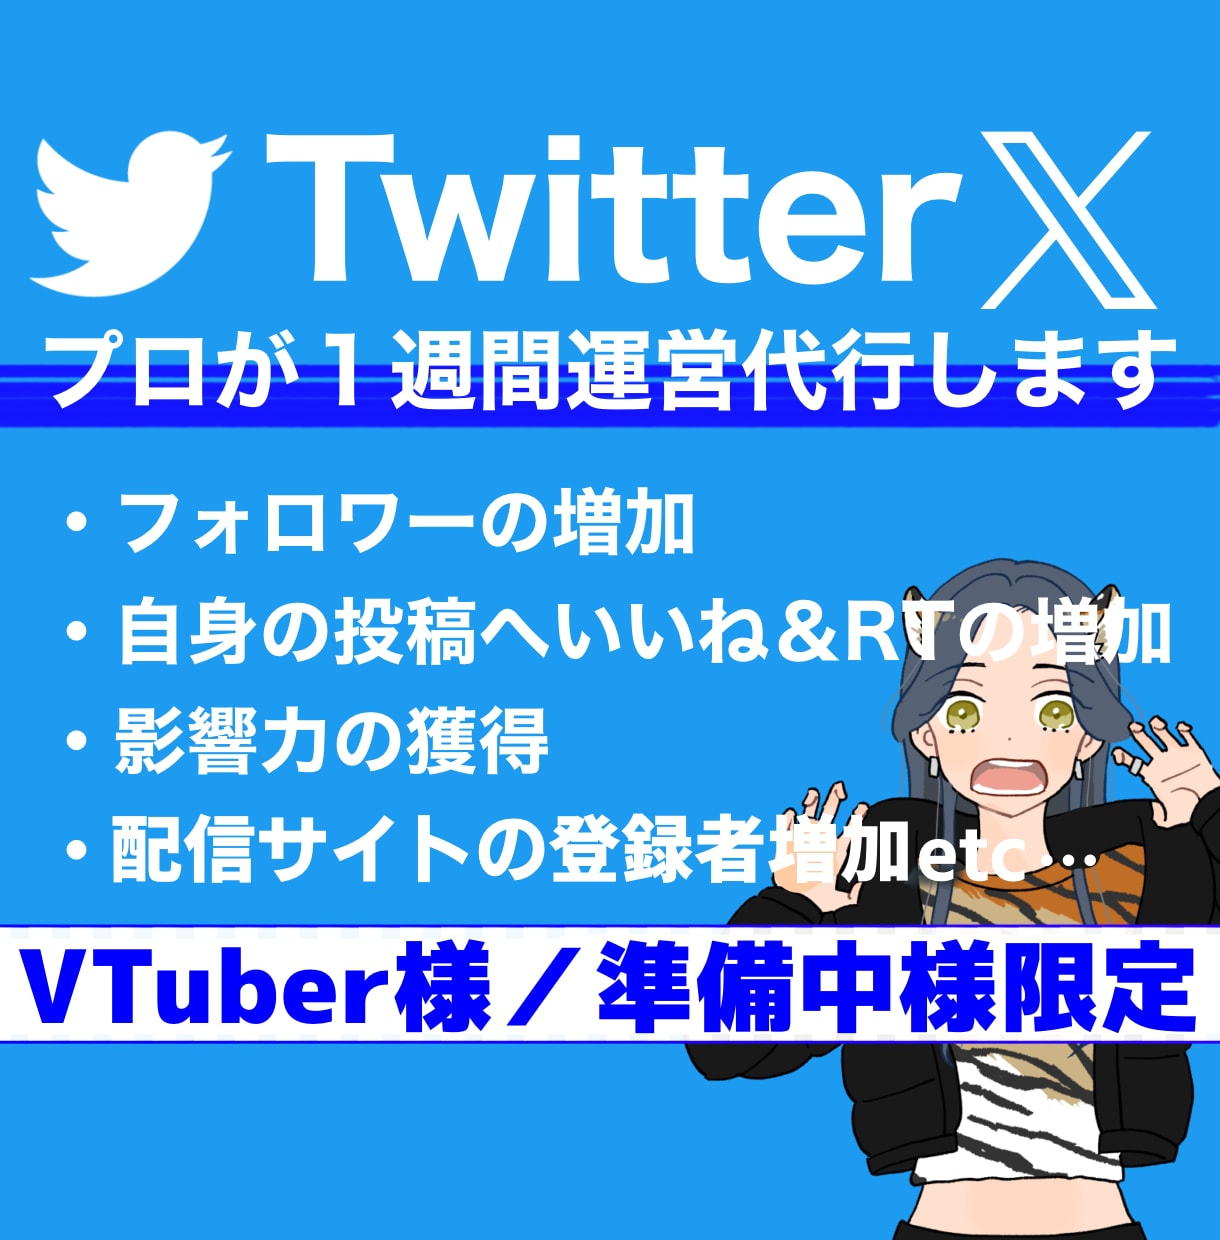 💬Coconala｜VTuber only!Professionals operate Twitter SNS specialist consultant Kaito 4.8 …